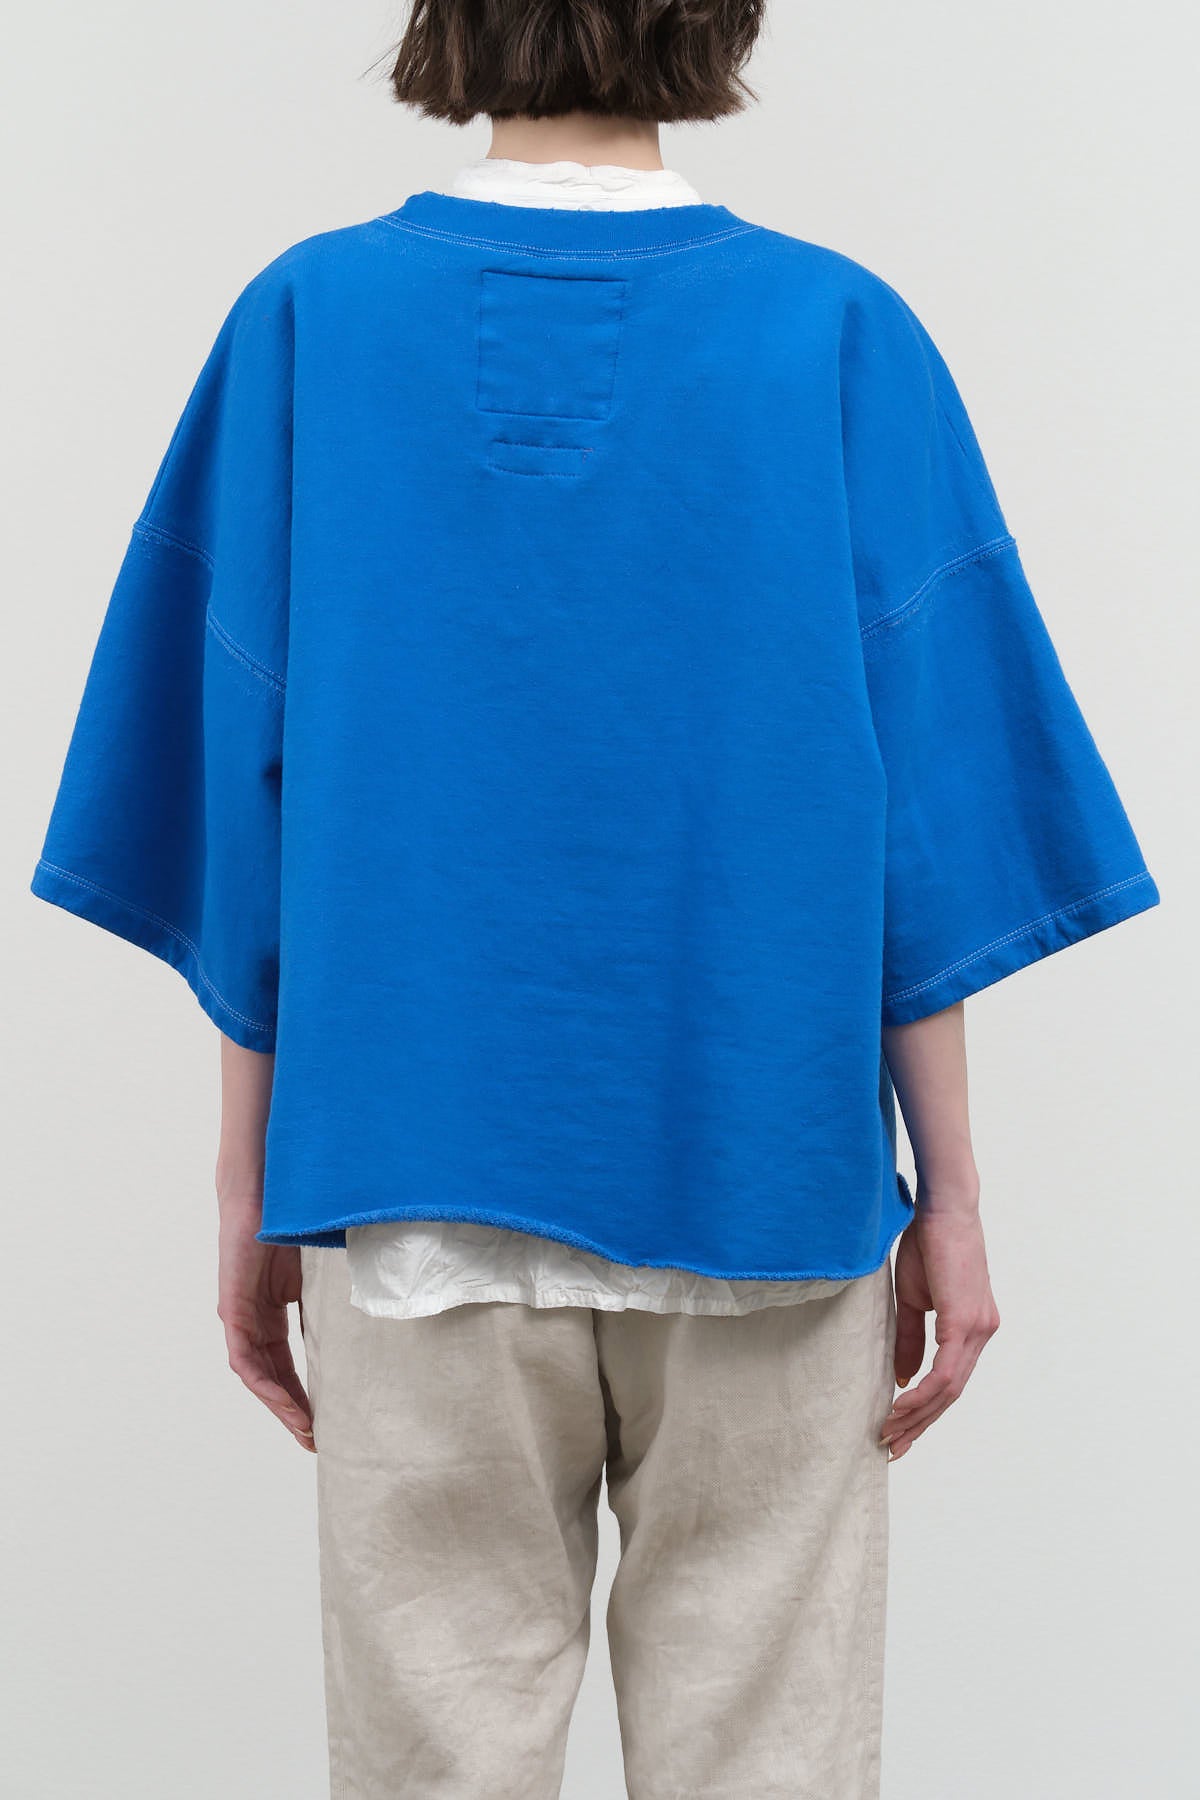 Back view of Fondly Sweatshirt in Royal